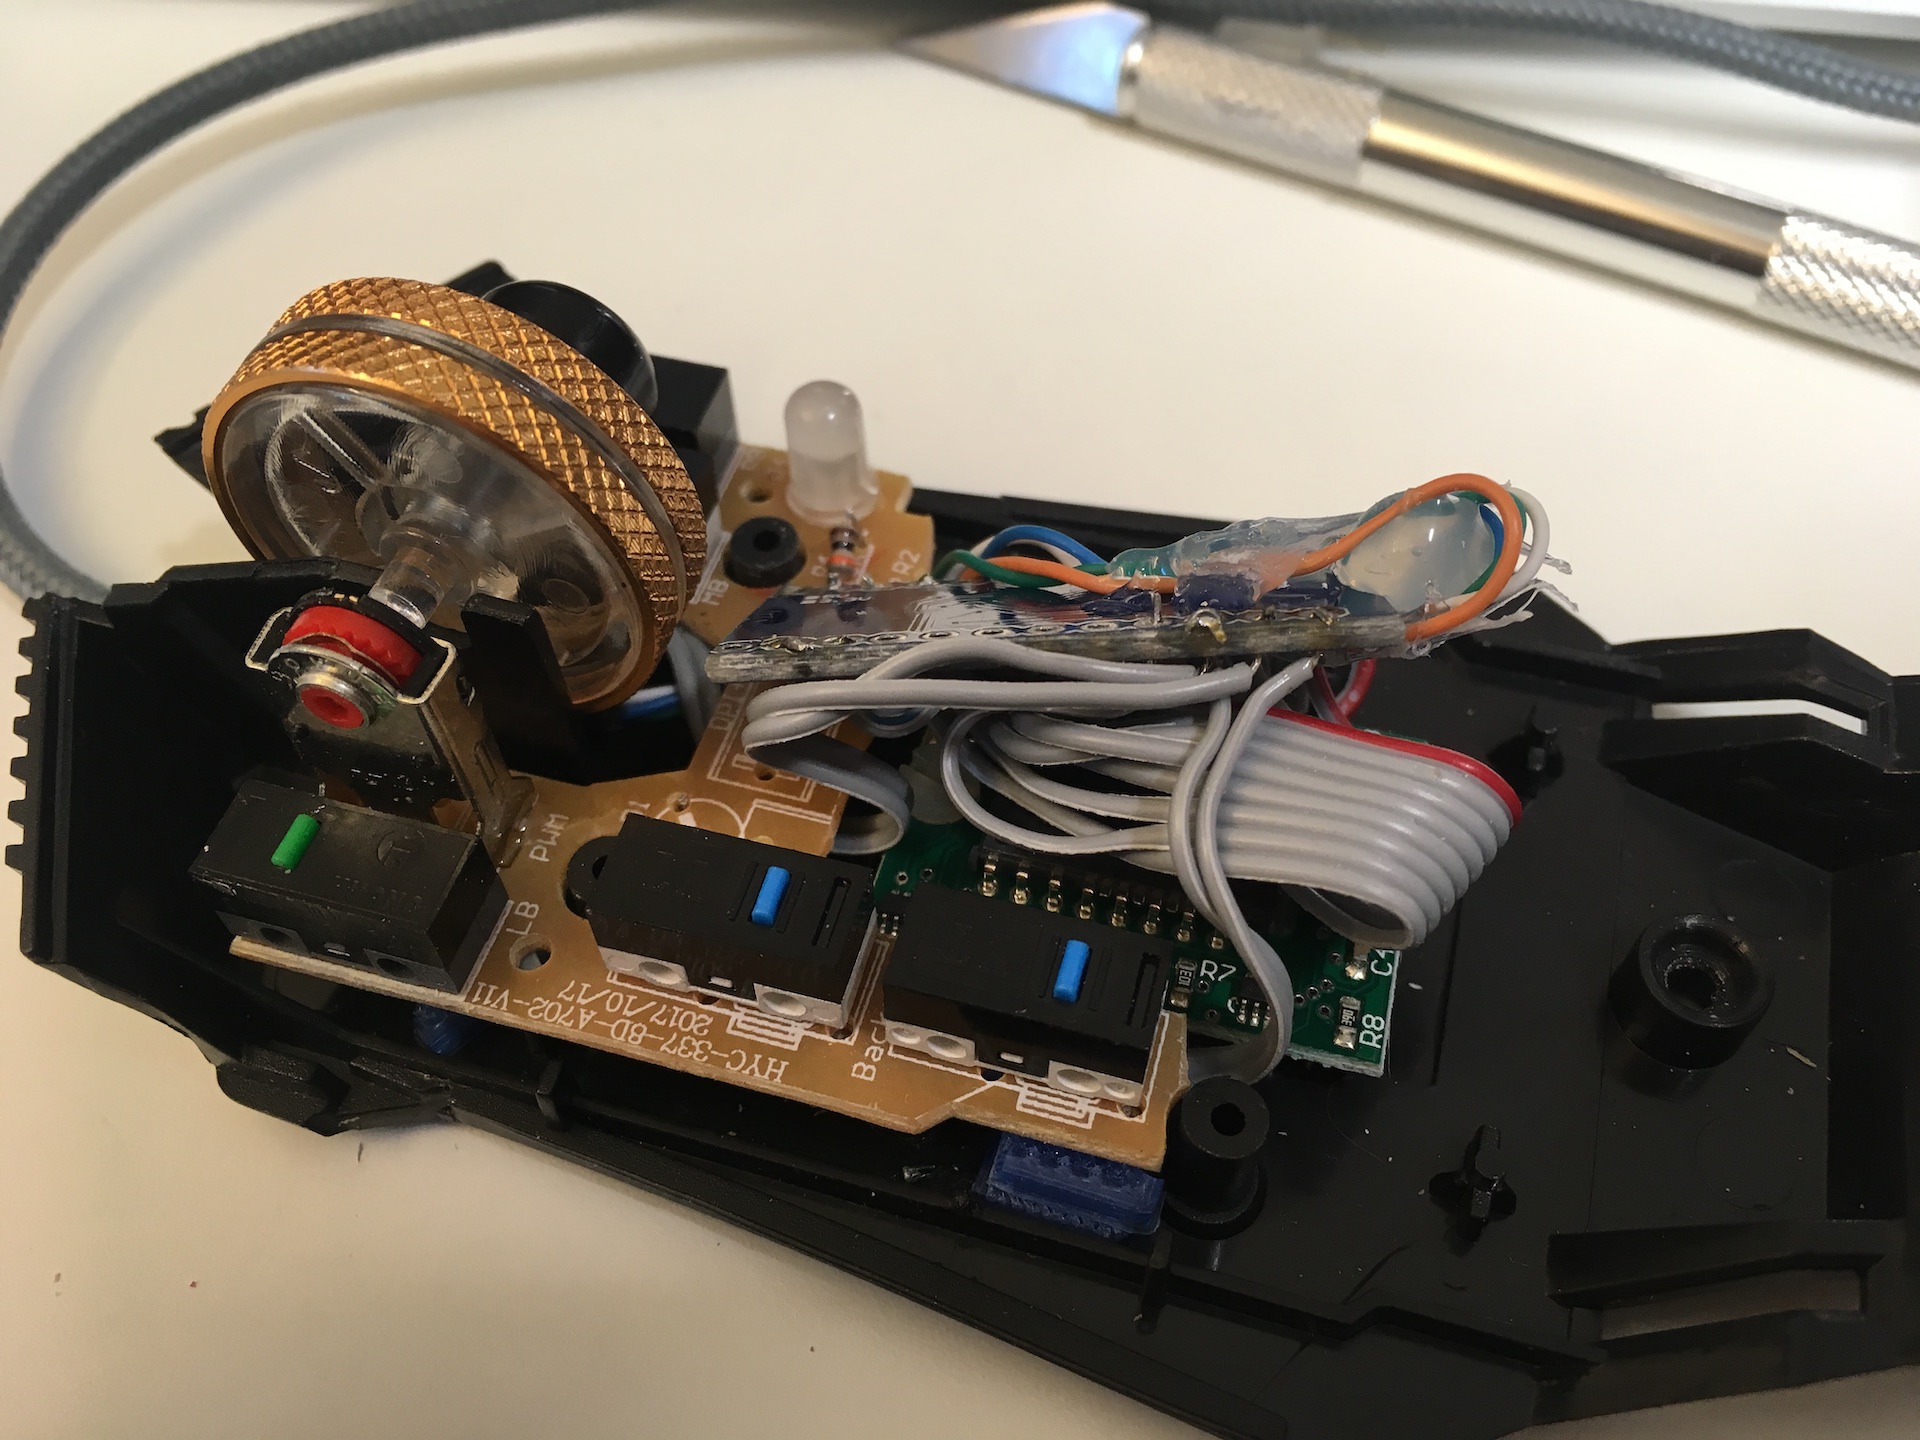 Image that shows all the components crumpled inside a mouse